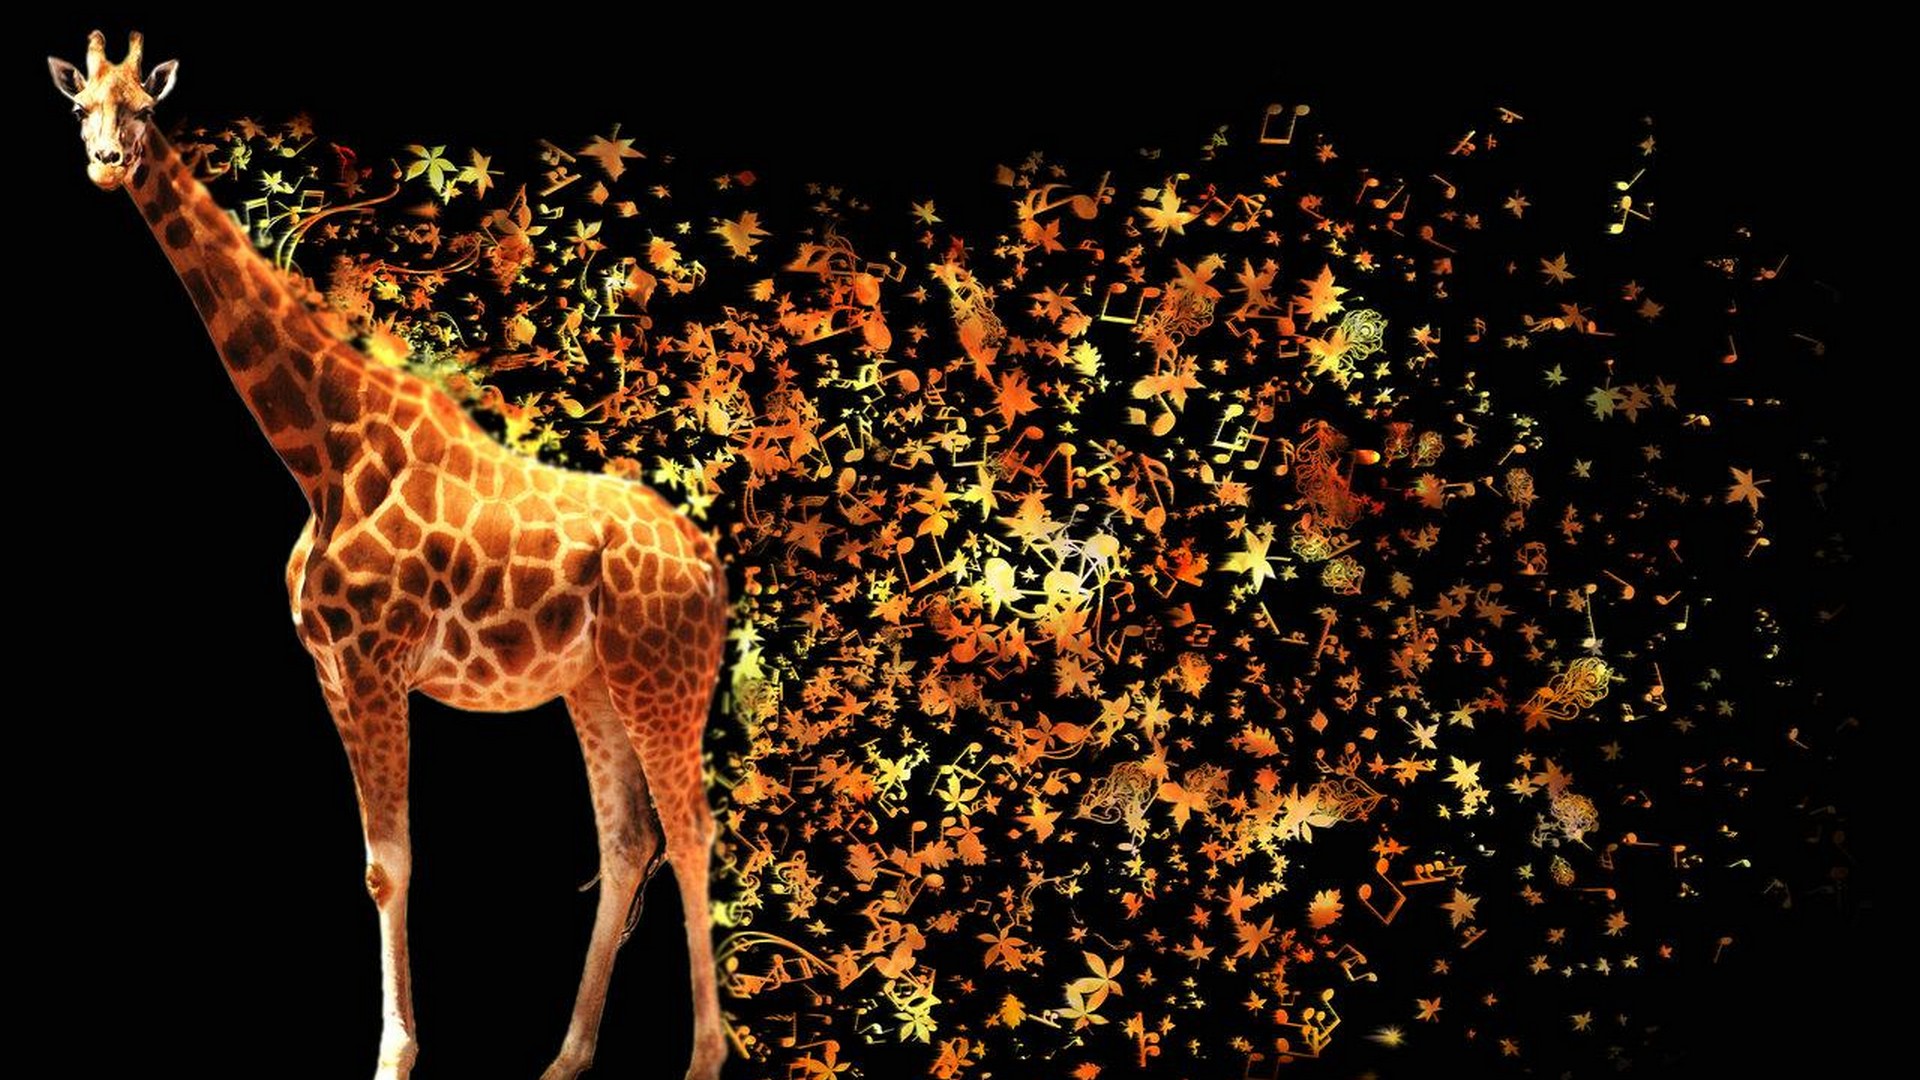 Giraffe Mobile Wallpapers, HD Giraffe Backgrounds, Free Images Download